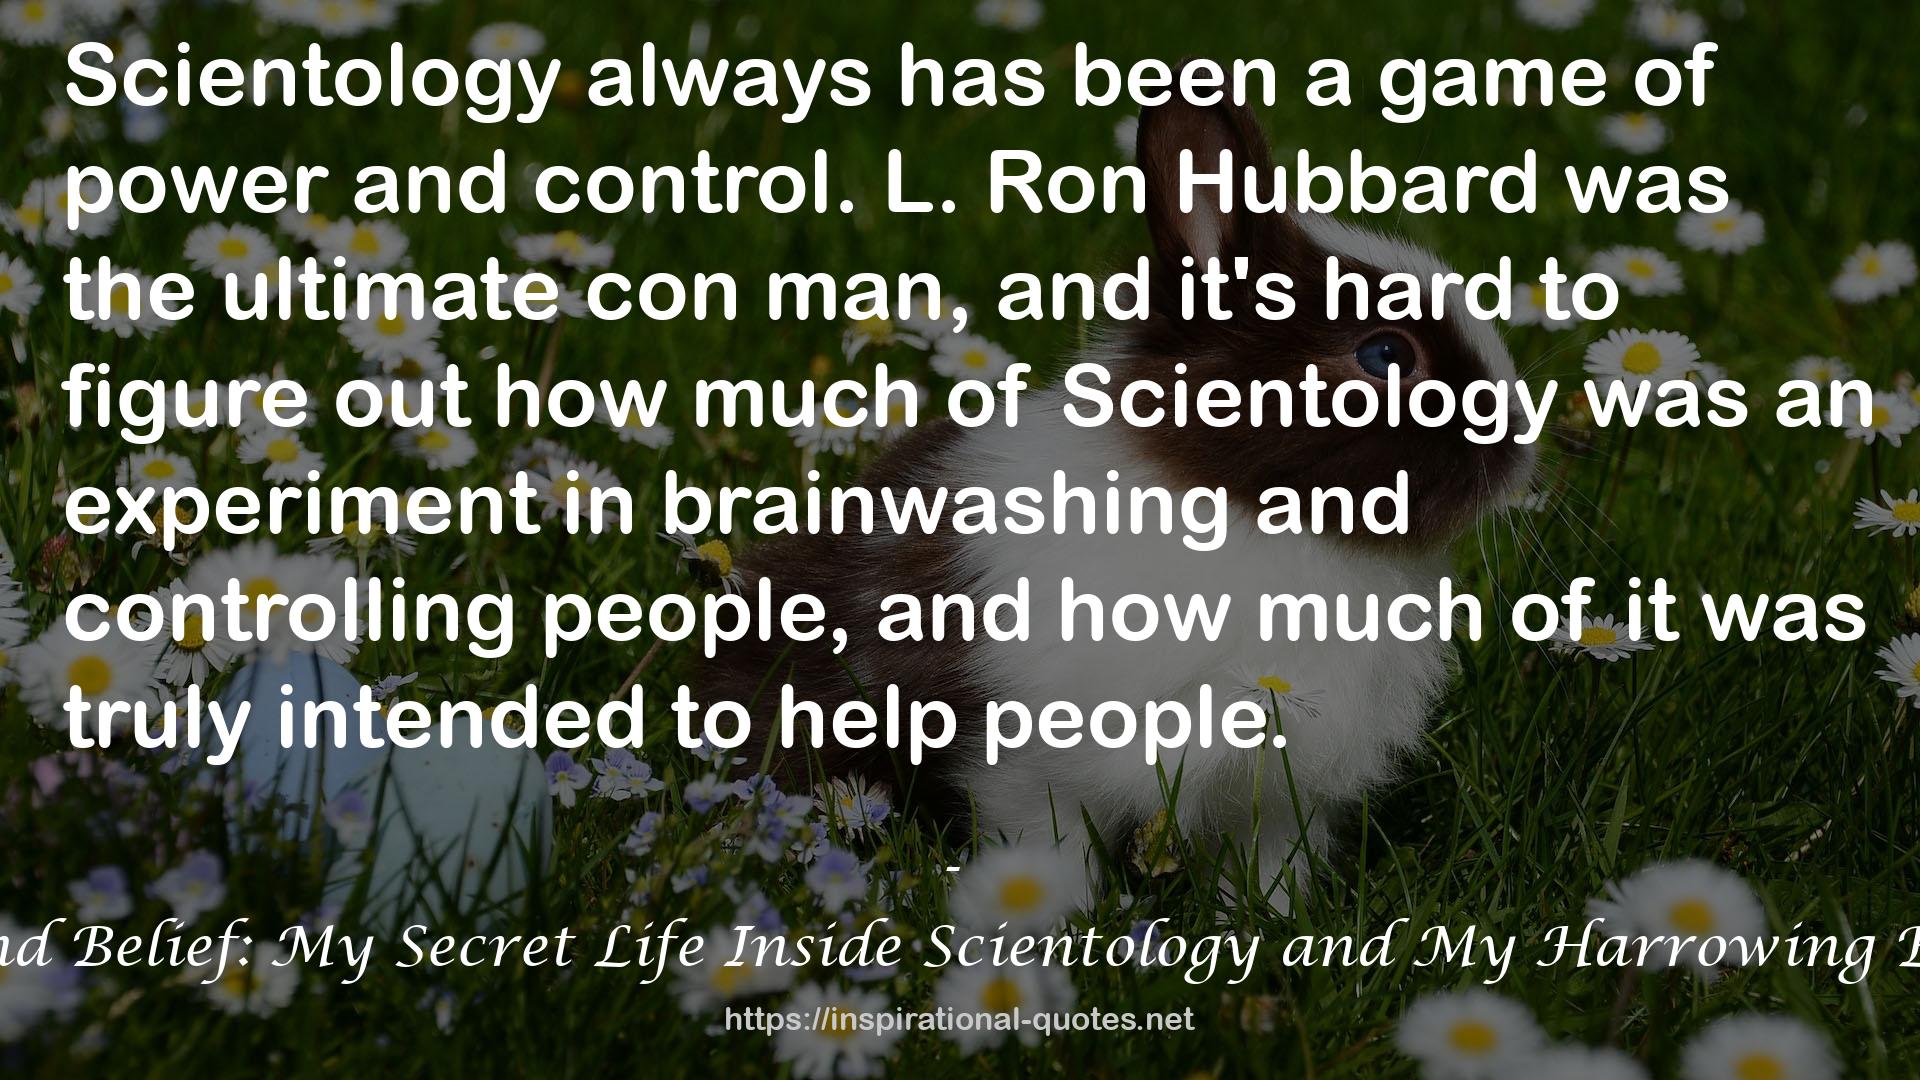 Beyond Belief: My Secret Life Inside Scientology and My Harrowing Escape QUOTES